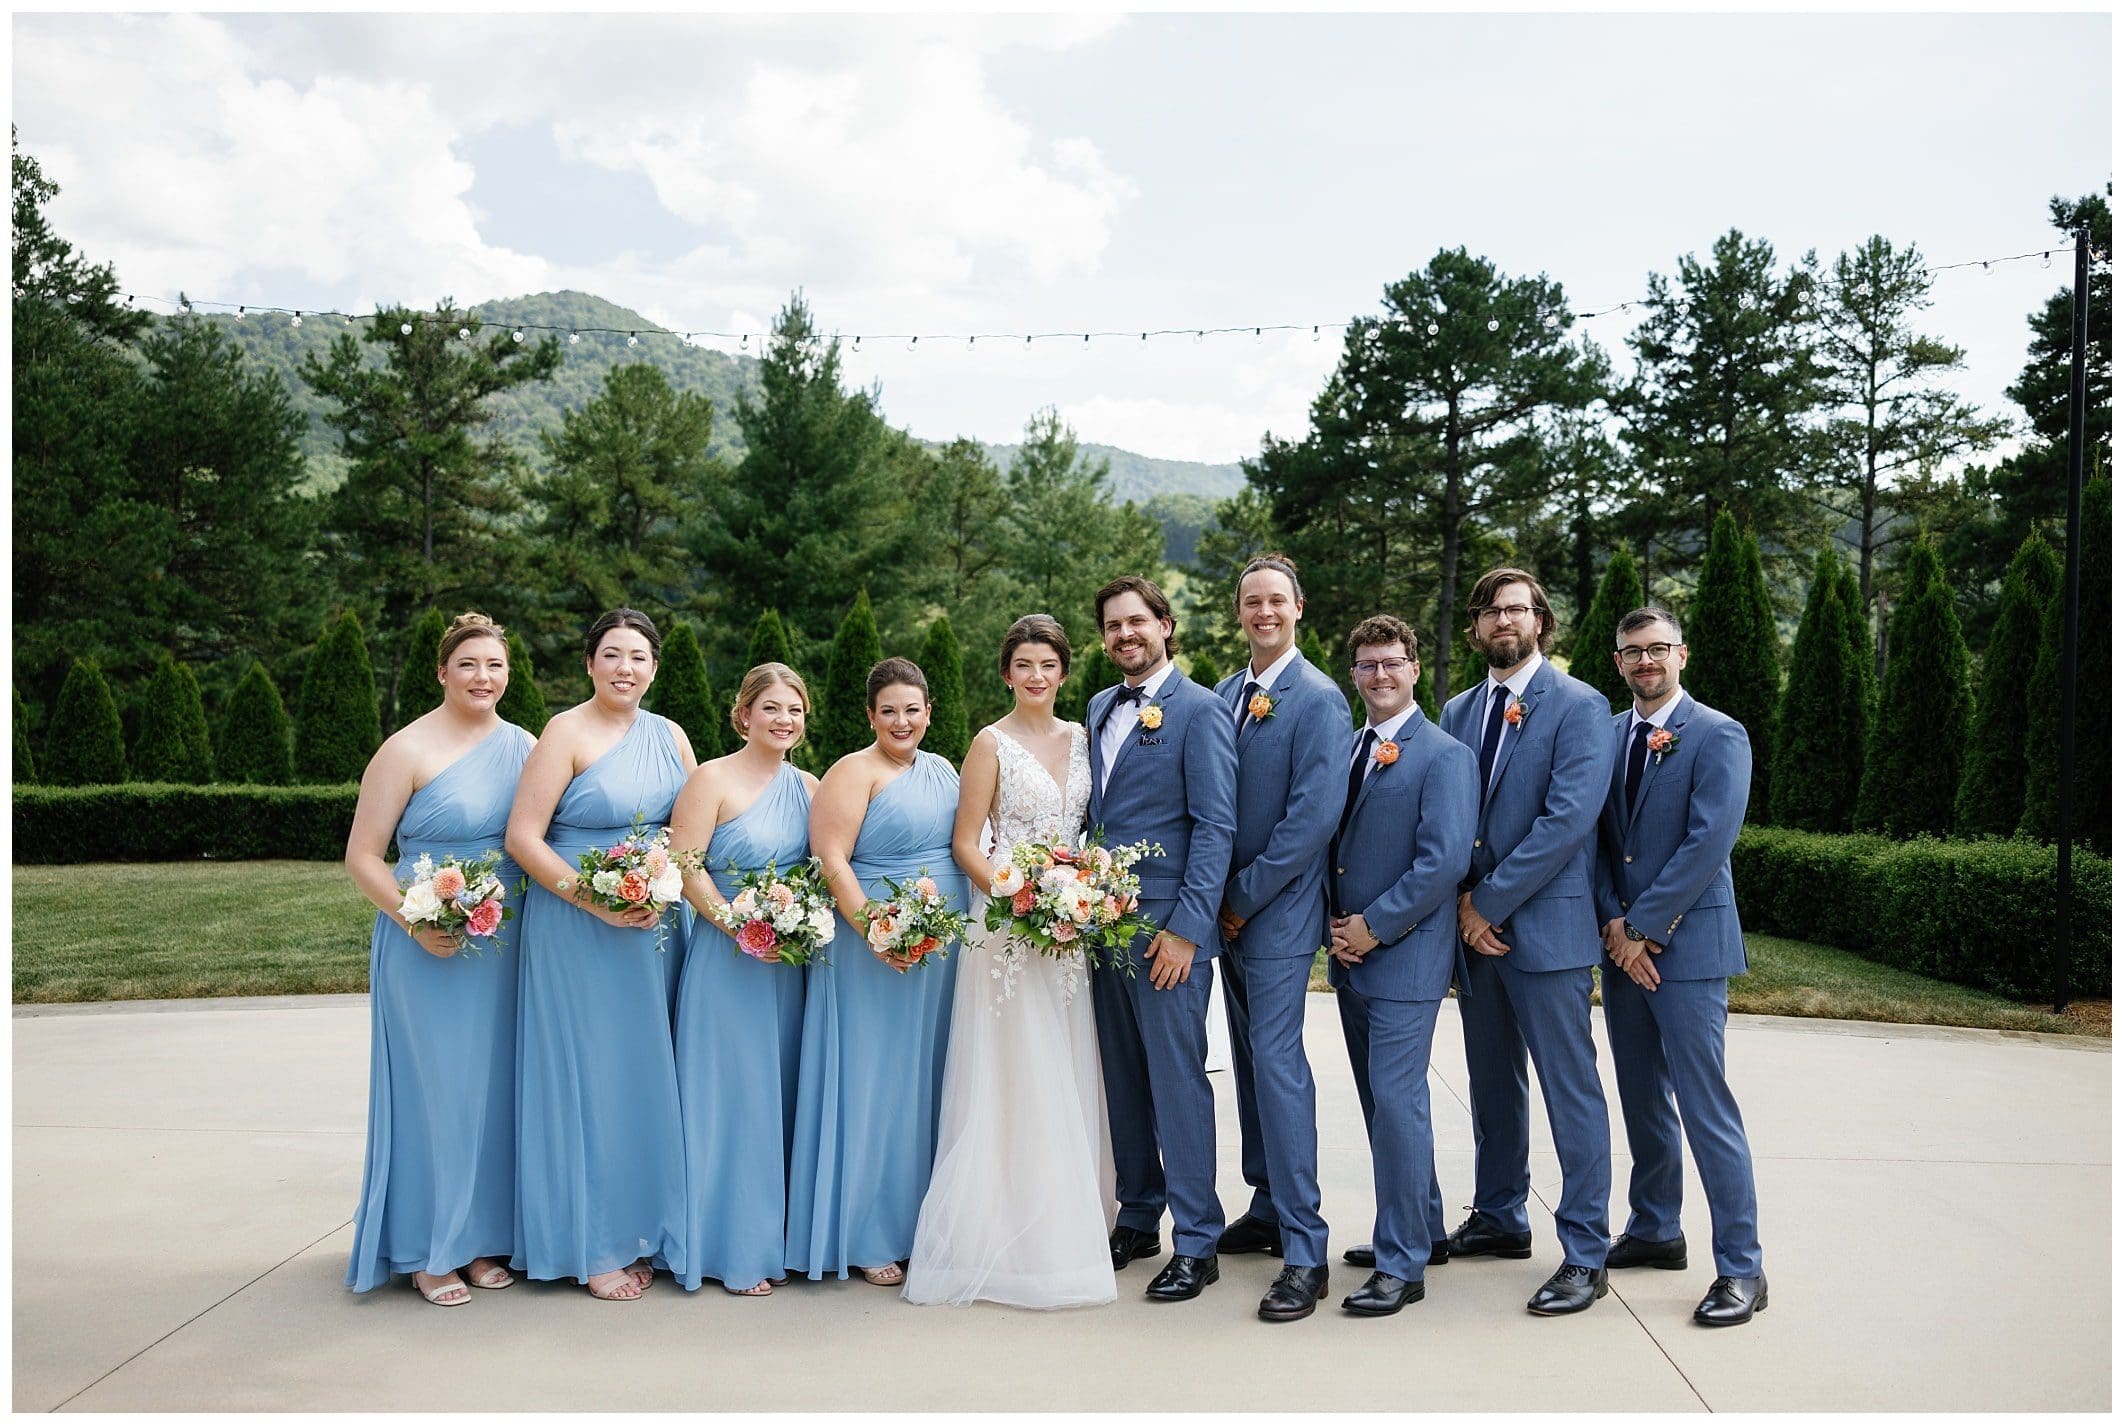 A group of bridesmaids and groomsmen pose for a photo.